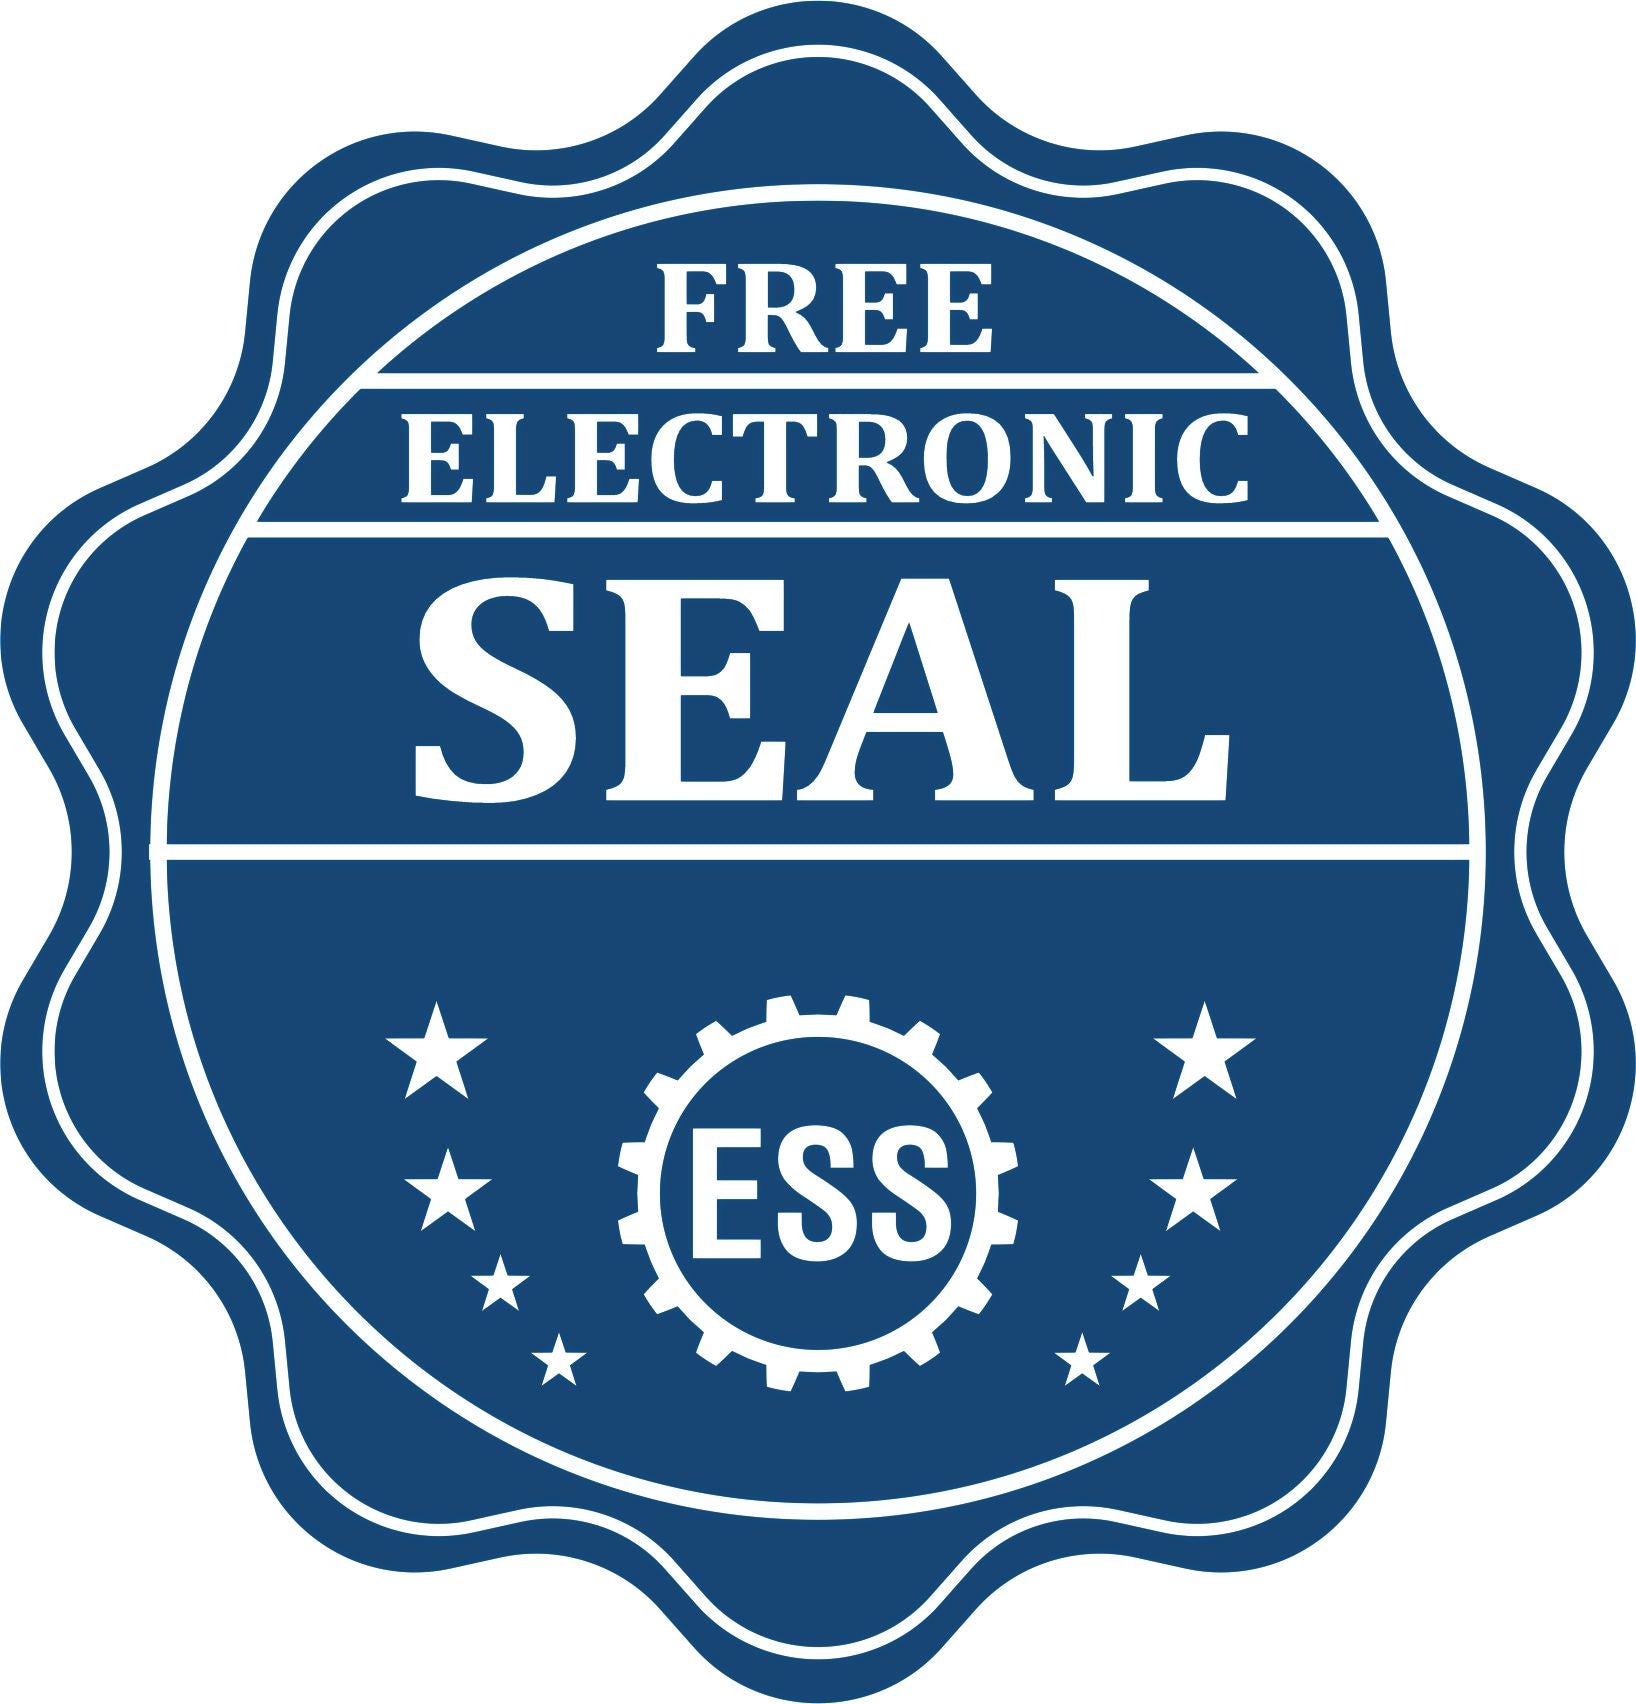 A badge showing a free electronic seal for the Premium MaxLight Pre-Inked Alaska Geology Stamp with stars and the ESS gear on the emblem.